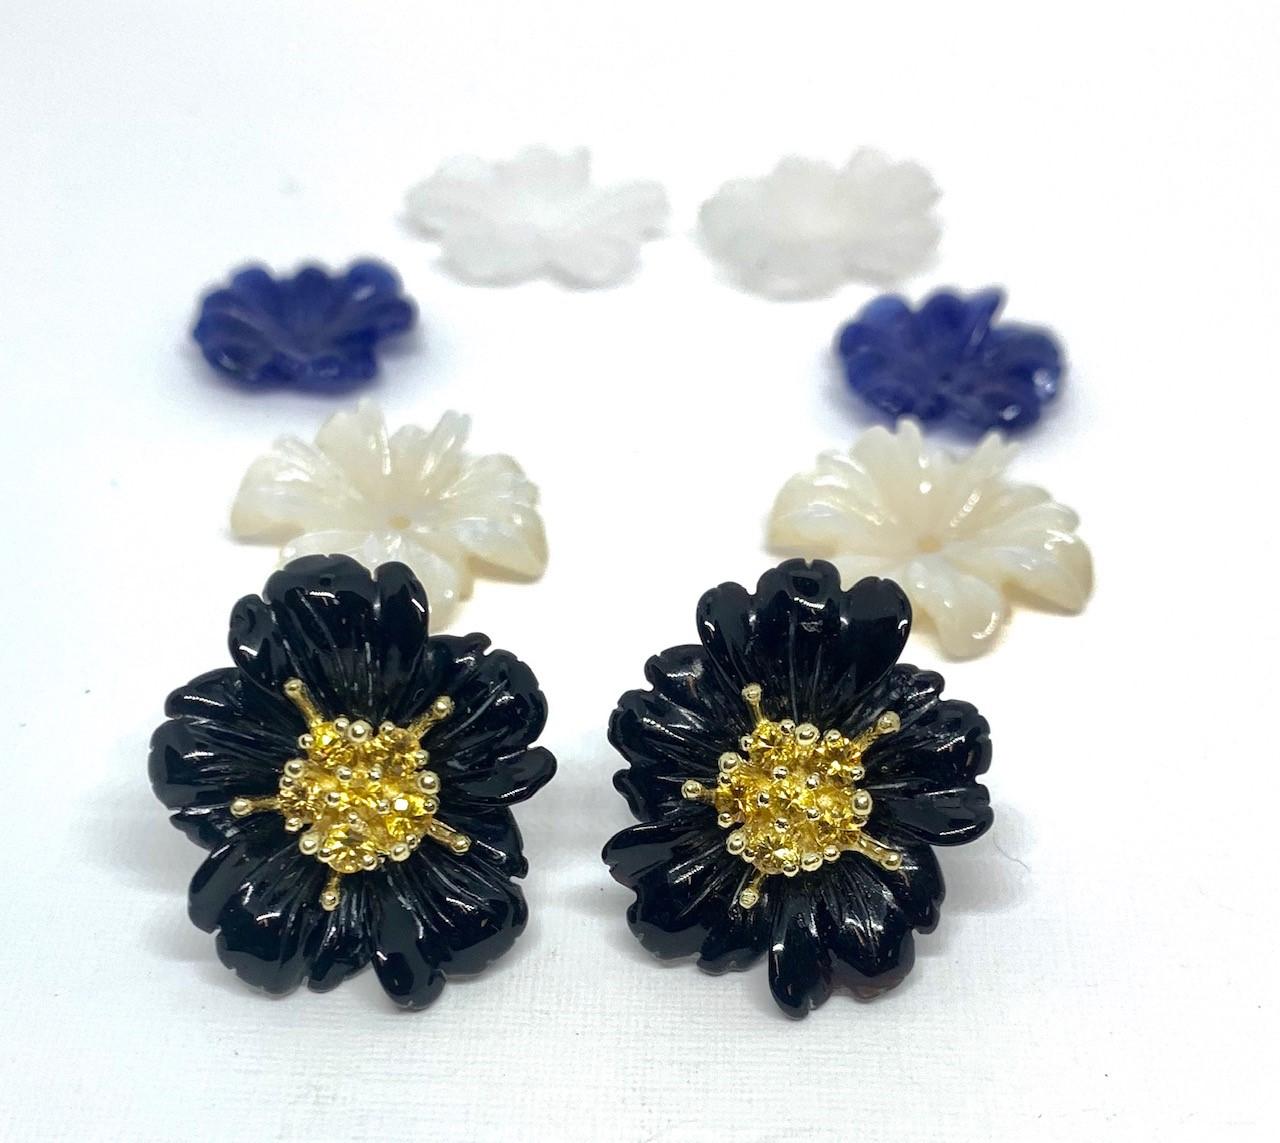 These finely hand-carved flower earring jackets are made of quartz, onyx, sodalite, and mother of pearl. They are interchangeable when worn with our hand made 18k yellow gold 